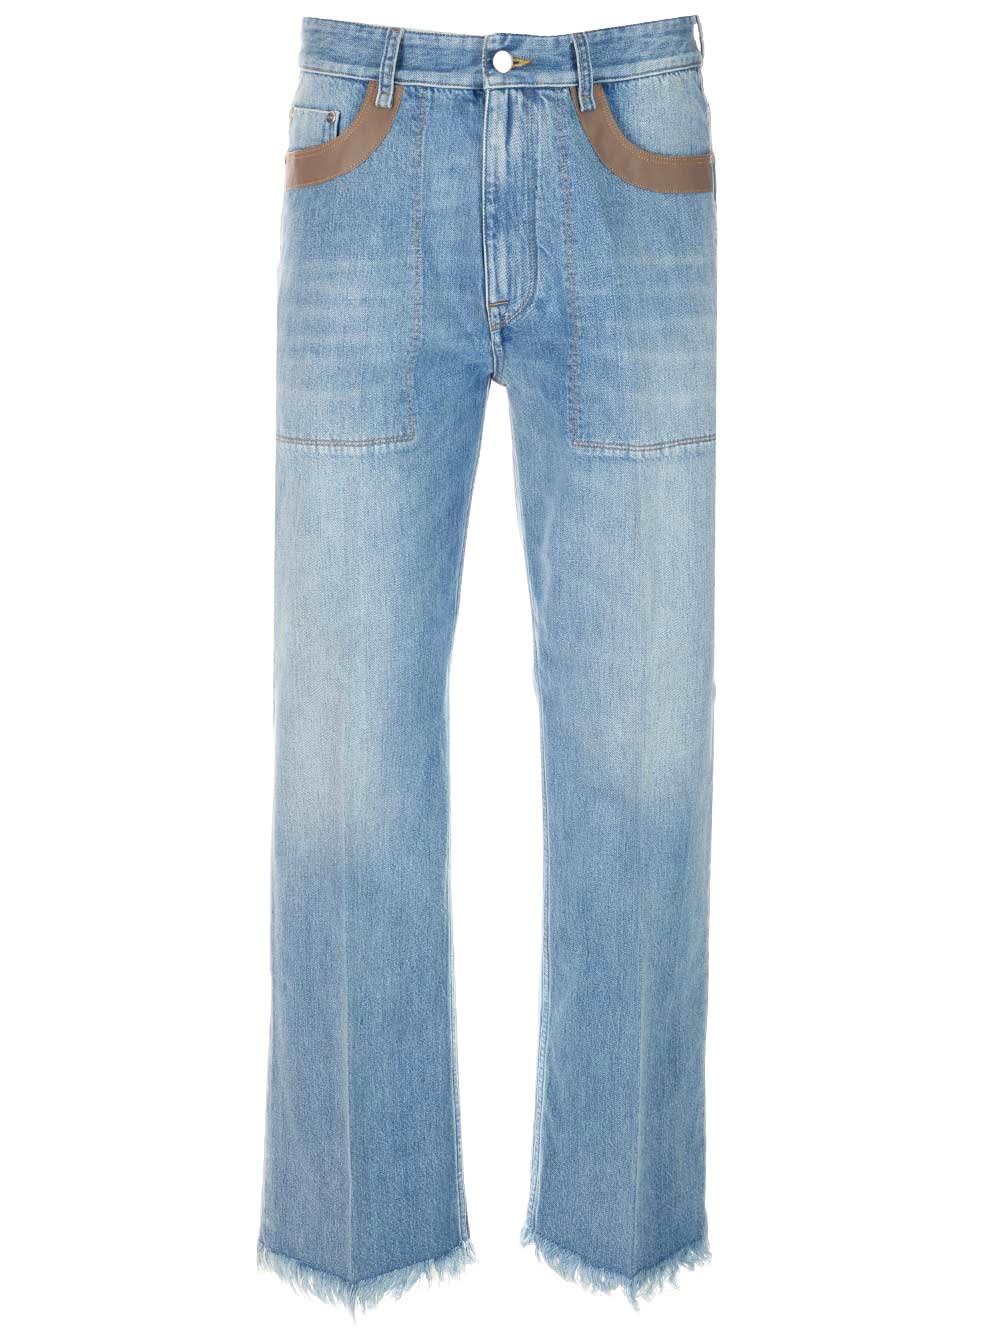 Light Blue Jeans With Fringes